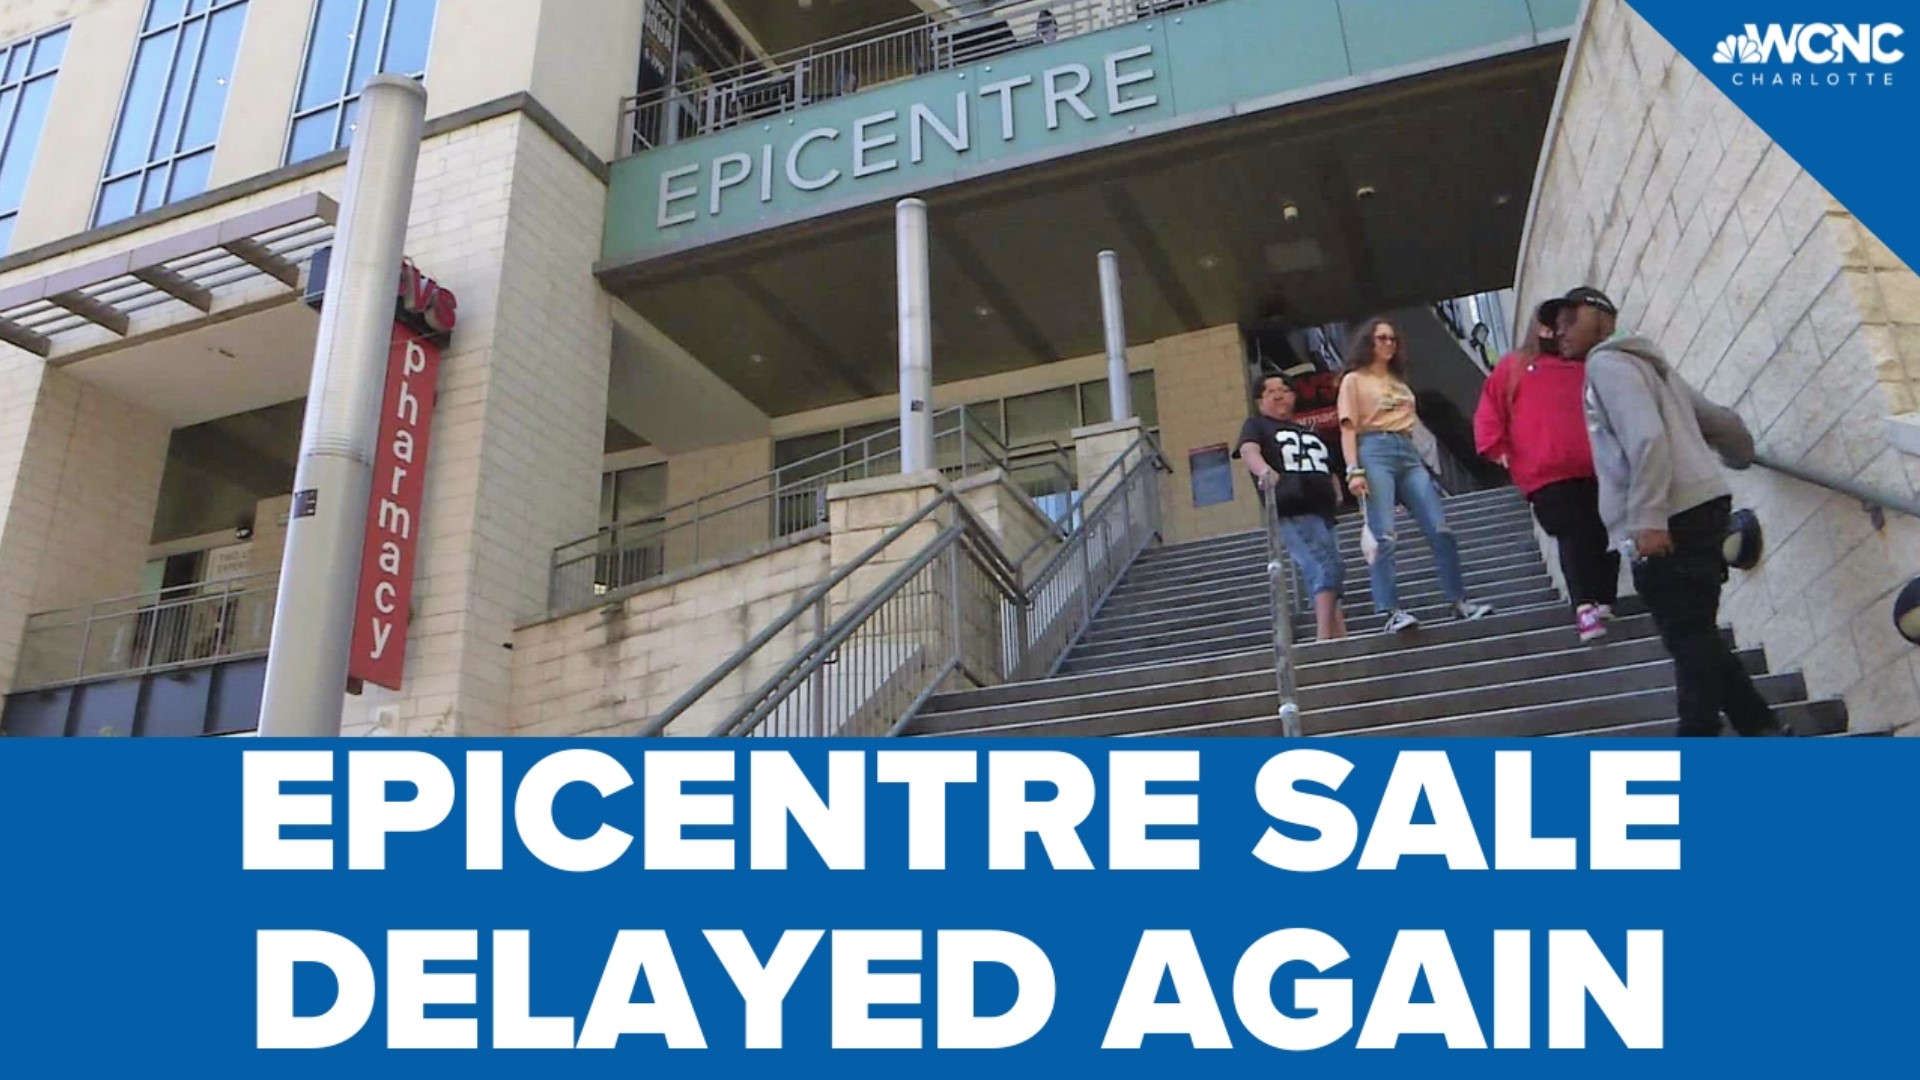 The sale of the Epicentre is being delayed for a second time. The auction is being pushed back until Aug. 9.